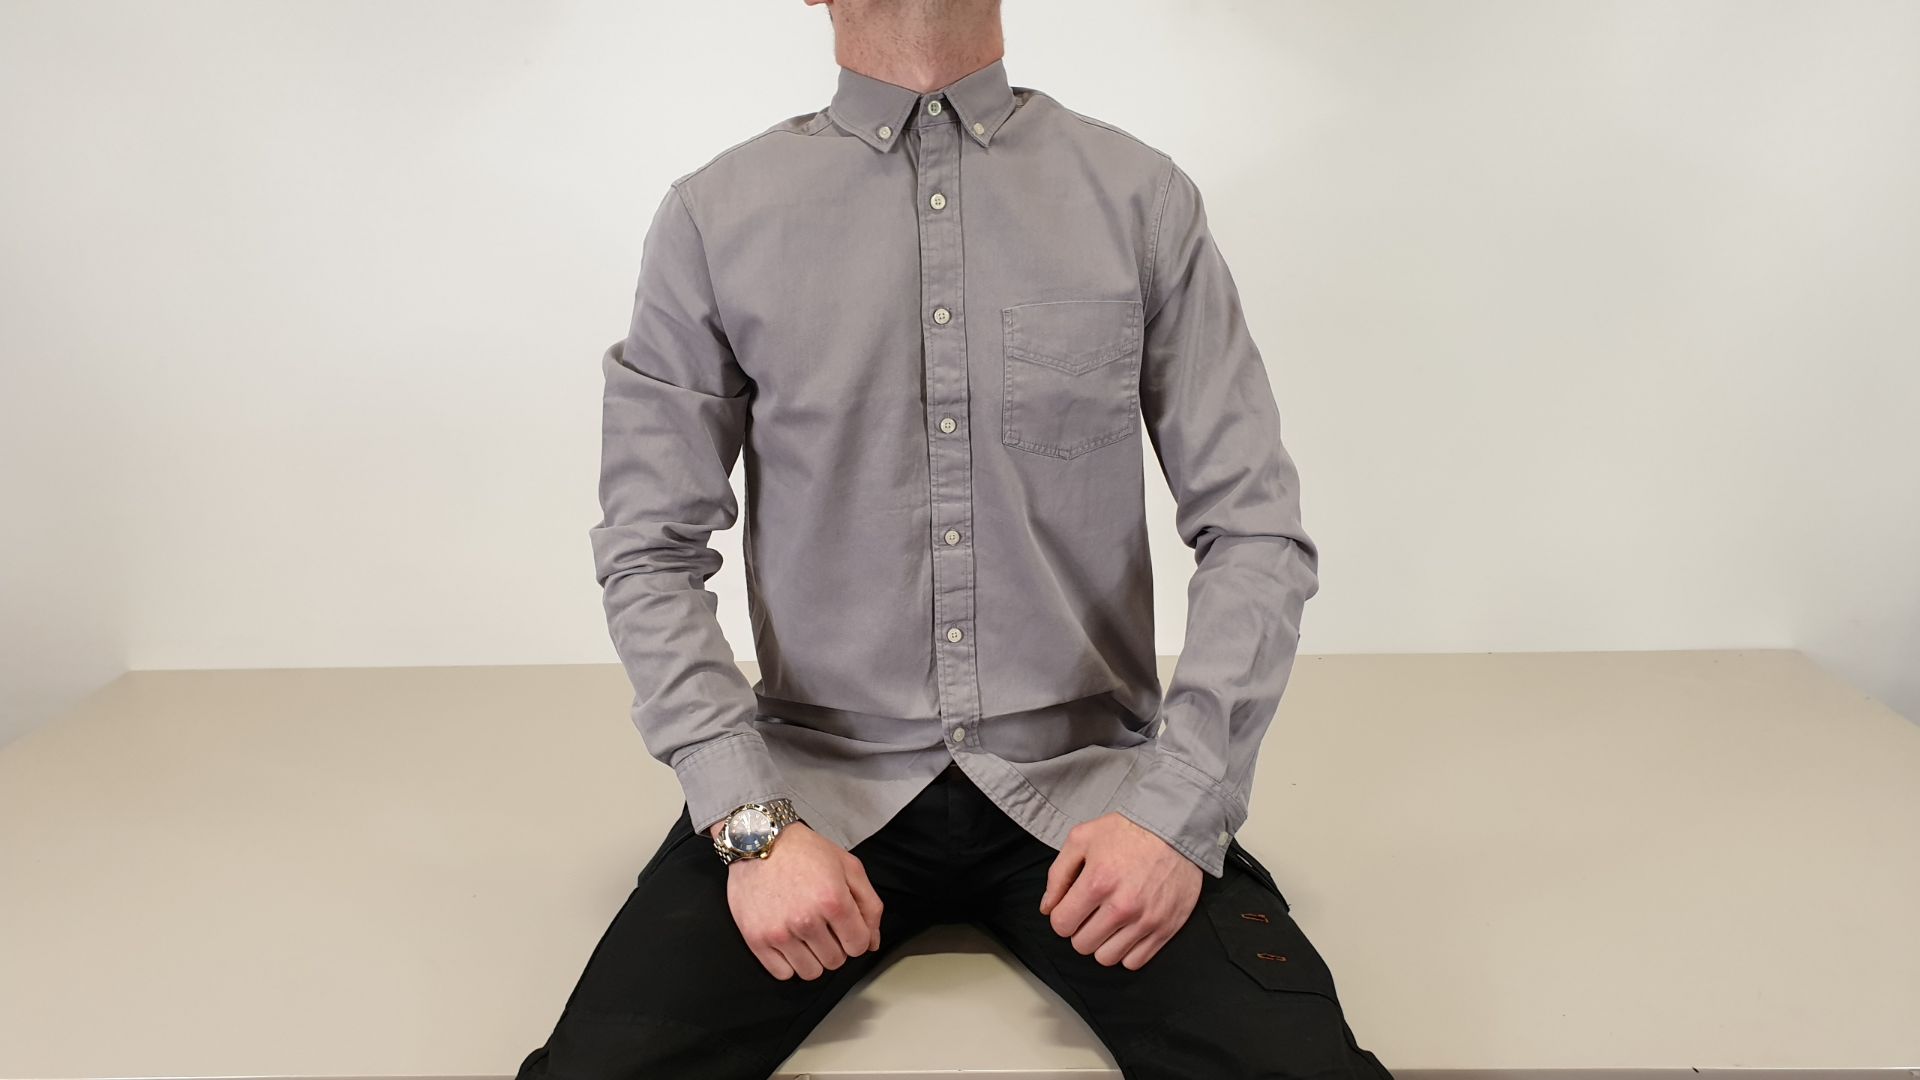 11 X BRAND NEW TOPMAN GREY BUTTONED SHIRT SIZE M RRP. £30.00 PP